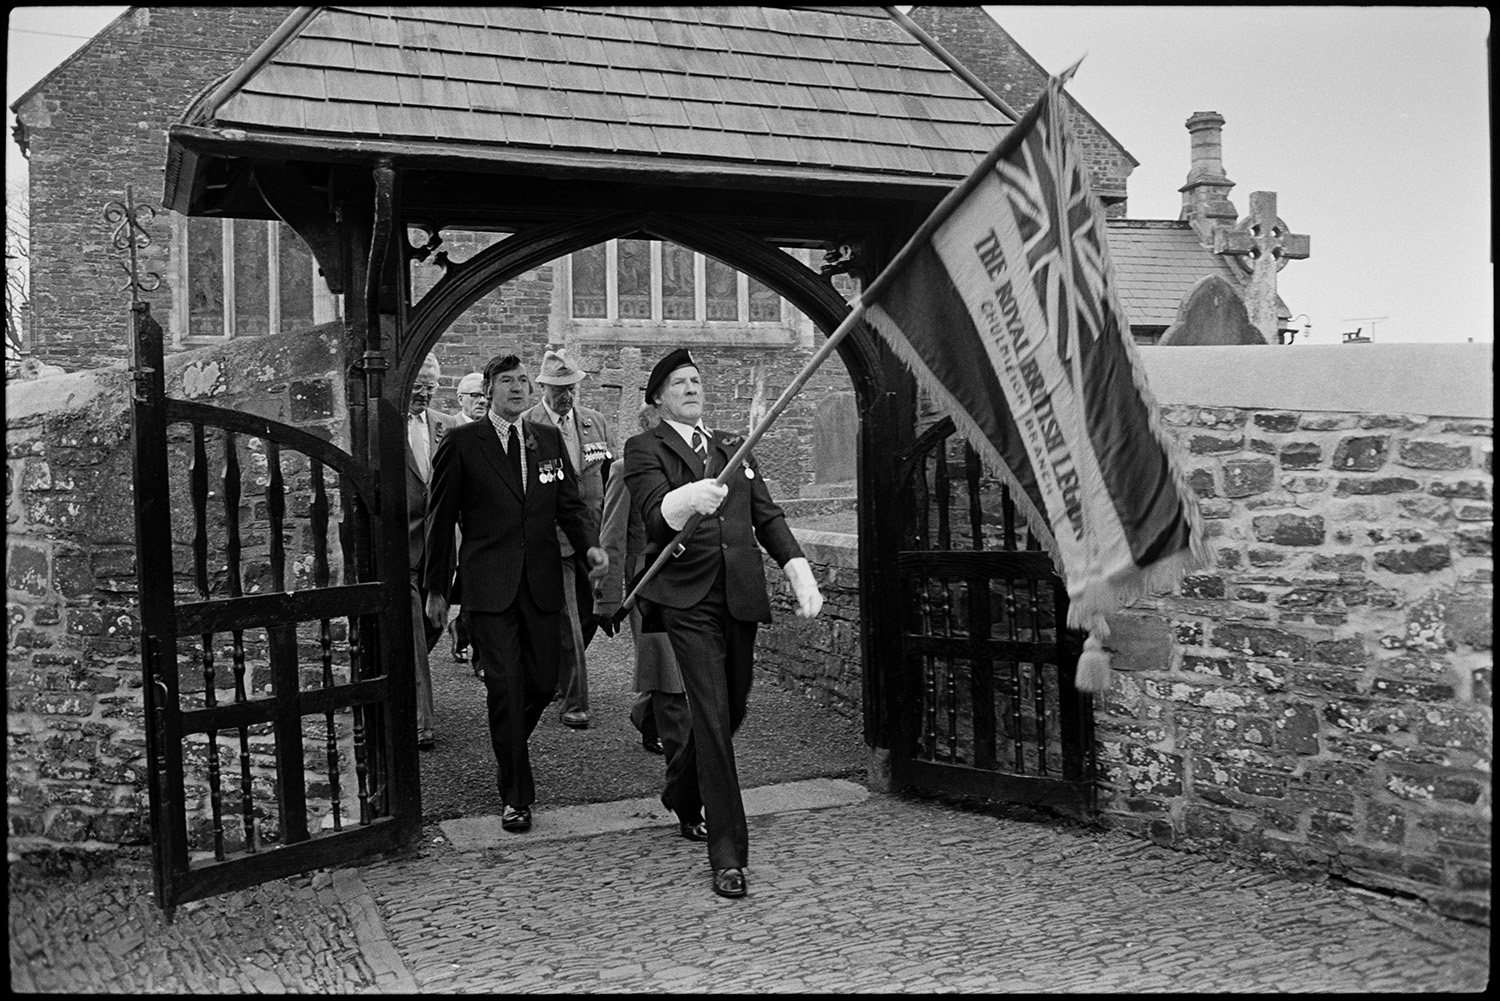 Parade at War Memorial, two minute silence, march to church, chatting afterwards, scouts.
[A group of men coming through the Lych Gate at Chulmleigh Church during Remembrance Sunday or Armistice Day to lead a procession to the war memorial. One is carrying the Royal British Legion flag, they are wearing poppies and some of them are wearing medals.]